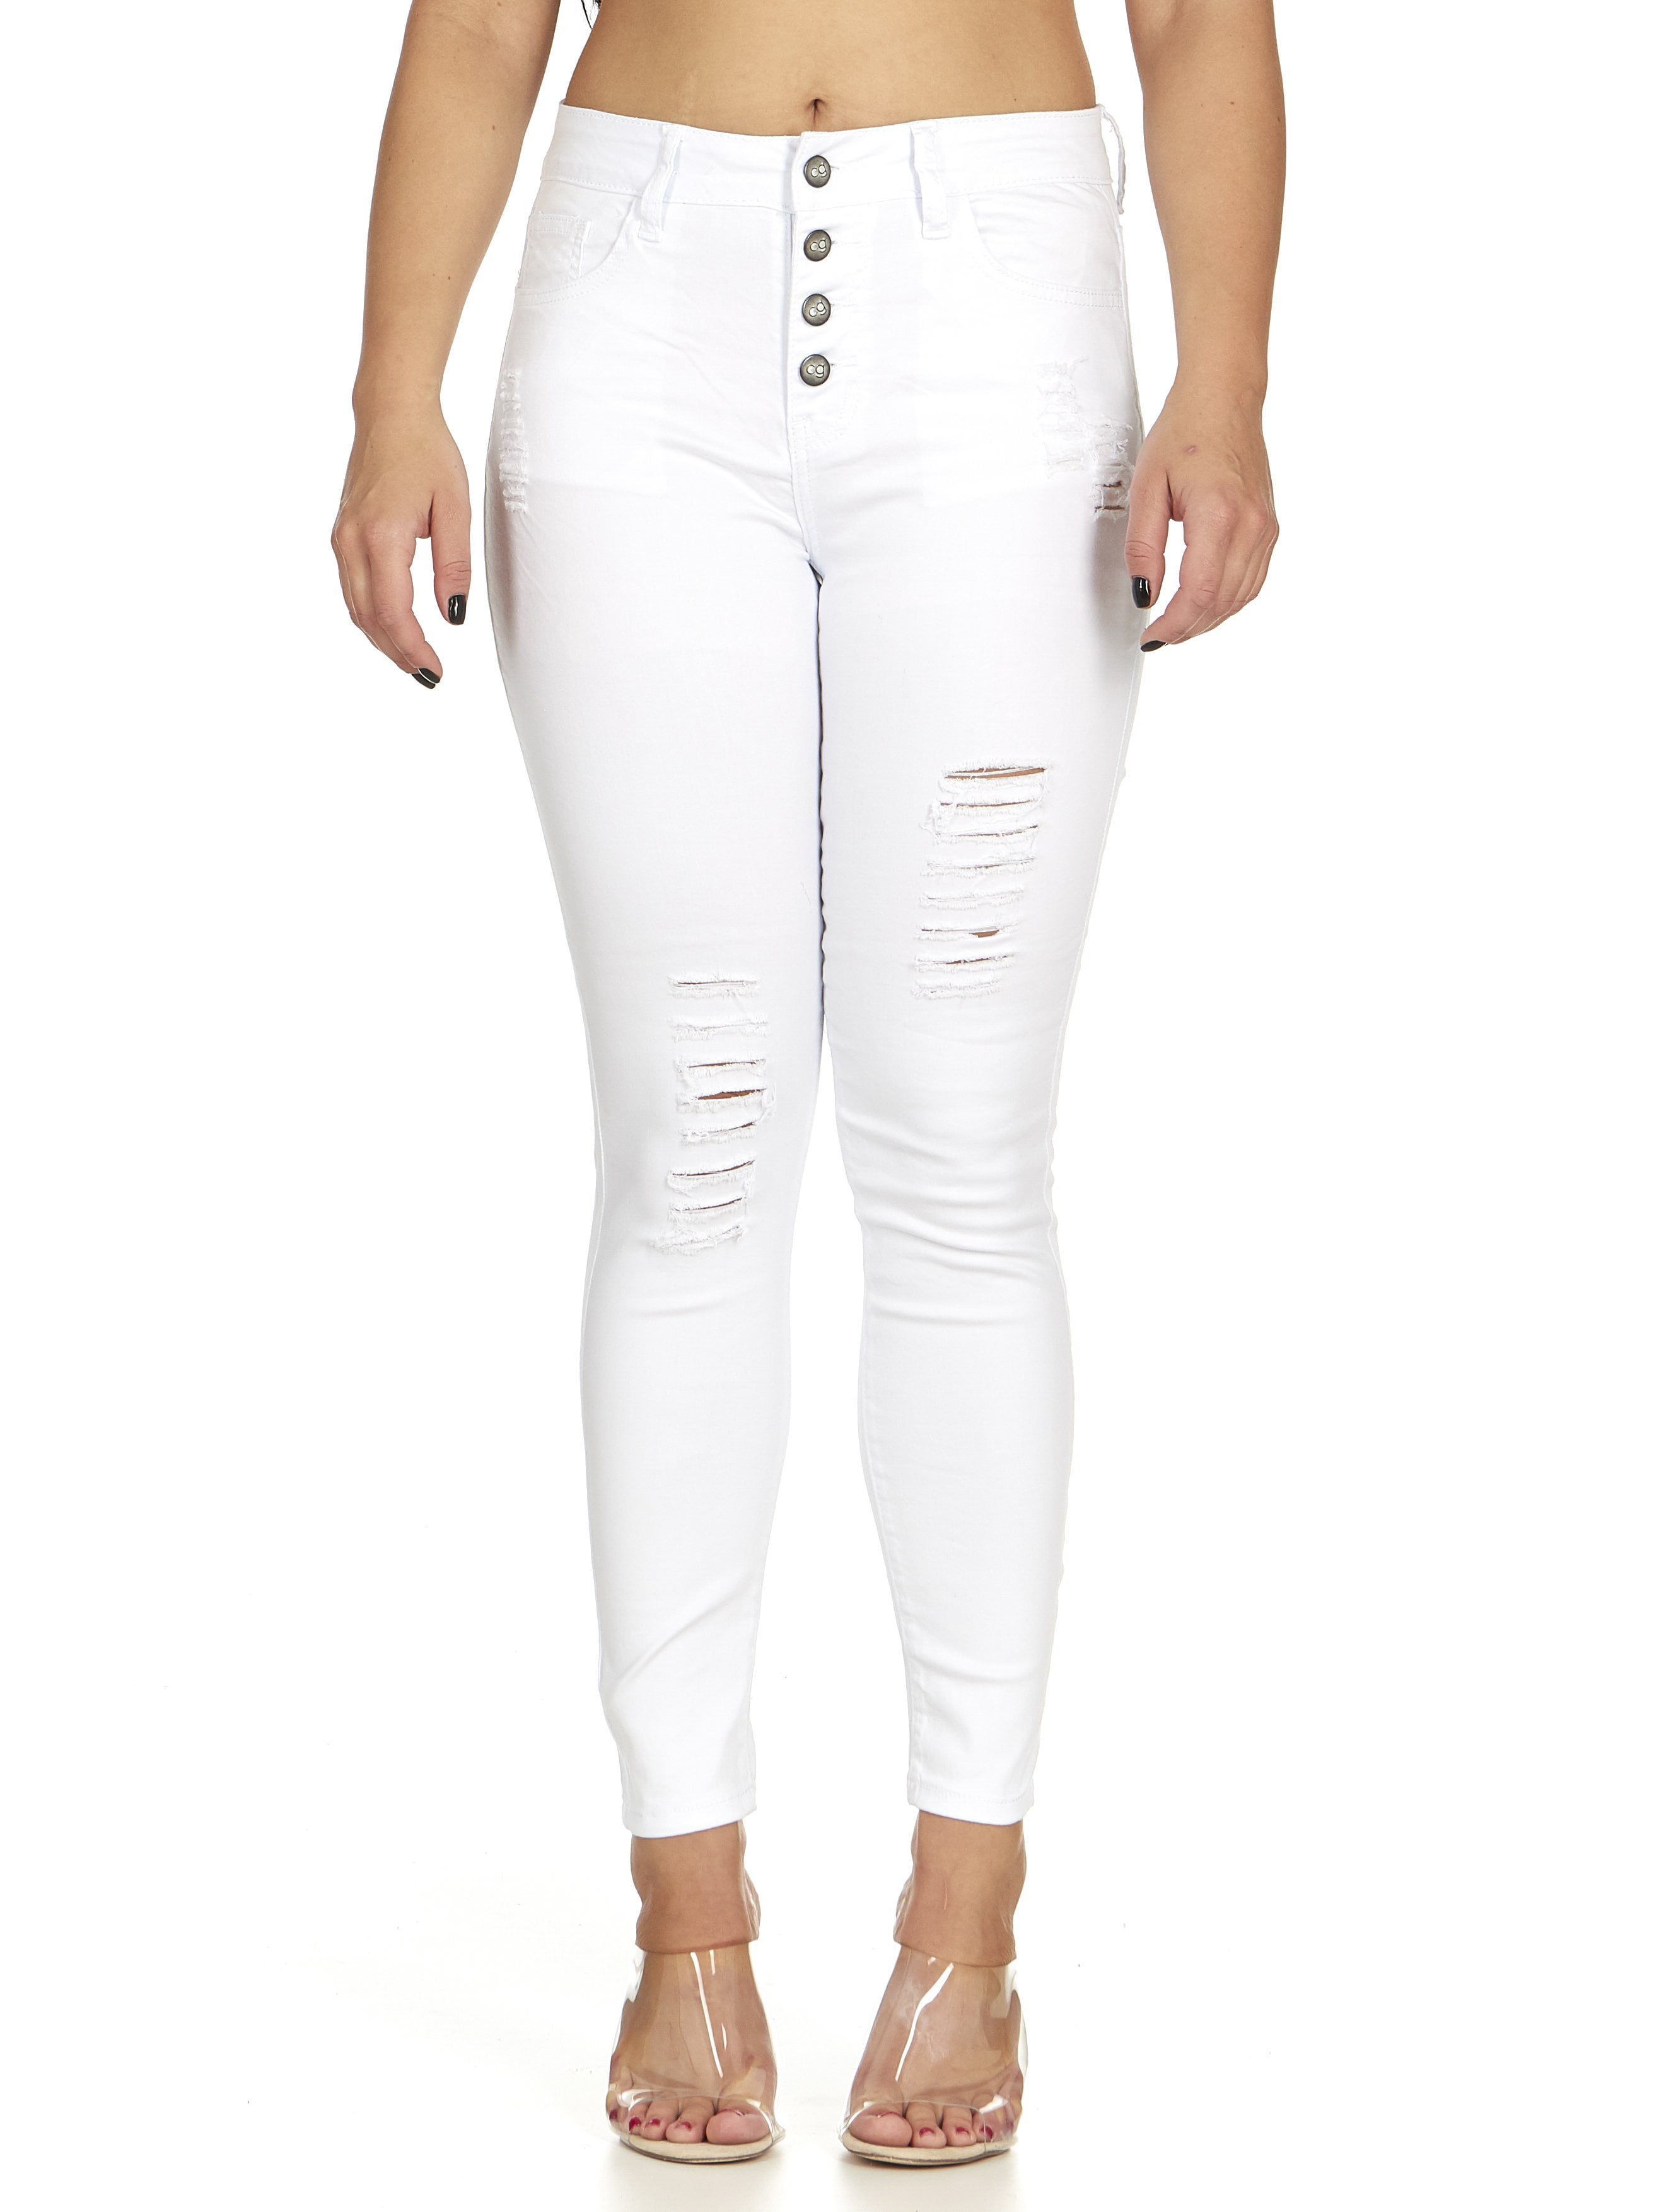 CG Jeans - Cover Girl Women's Ripped Slits Mid Rise Exposed Button ...